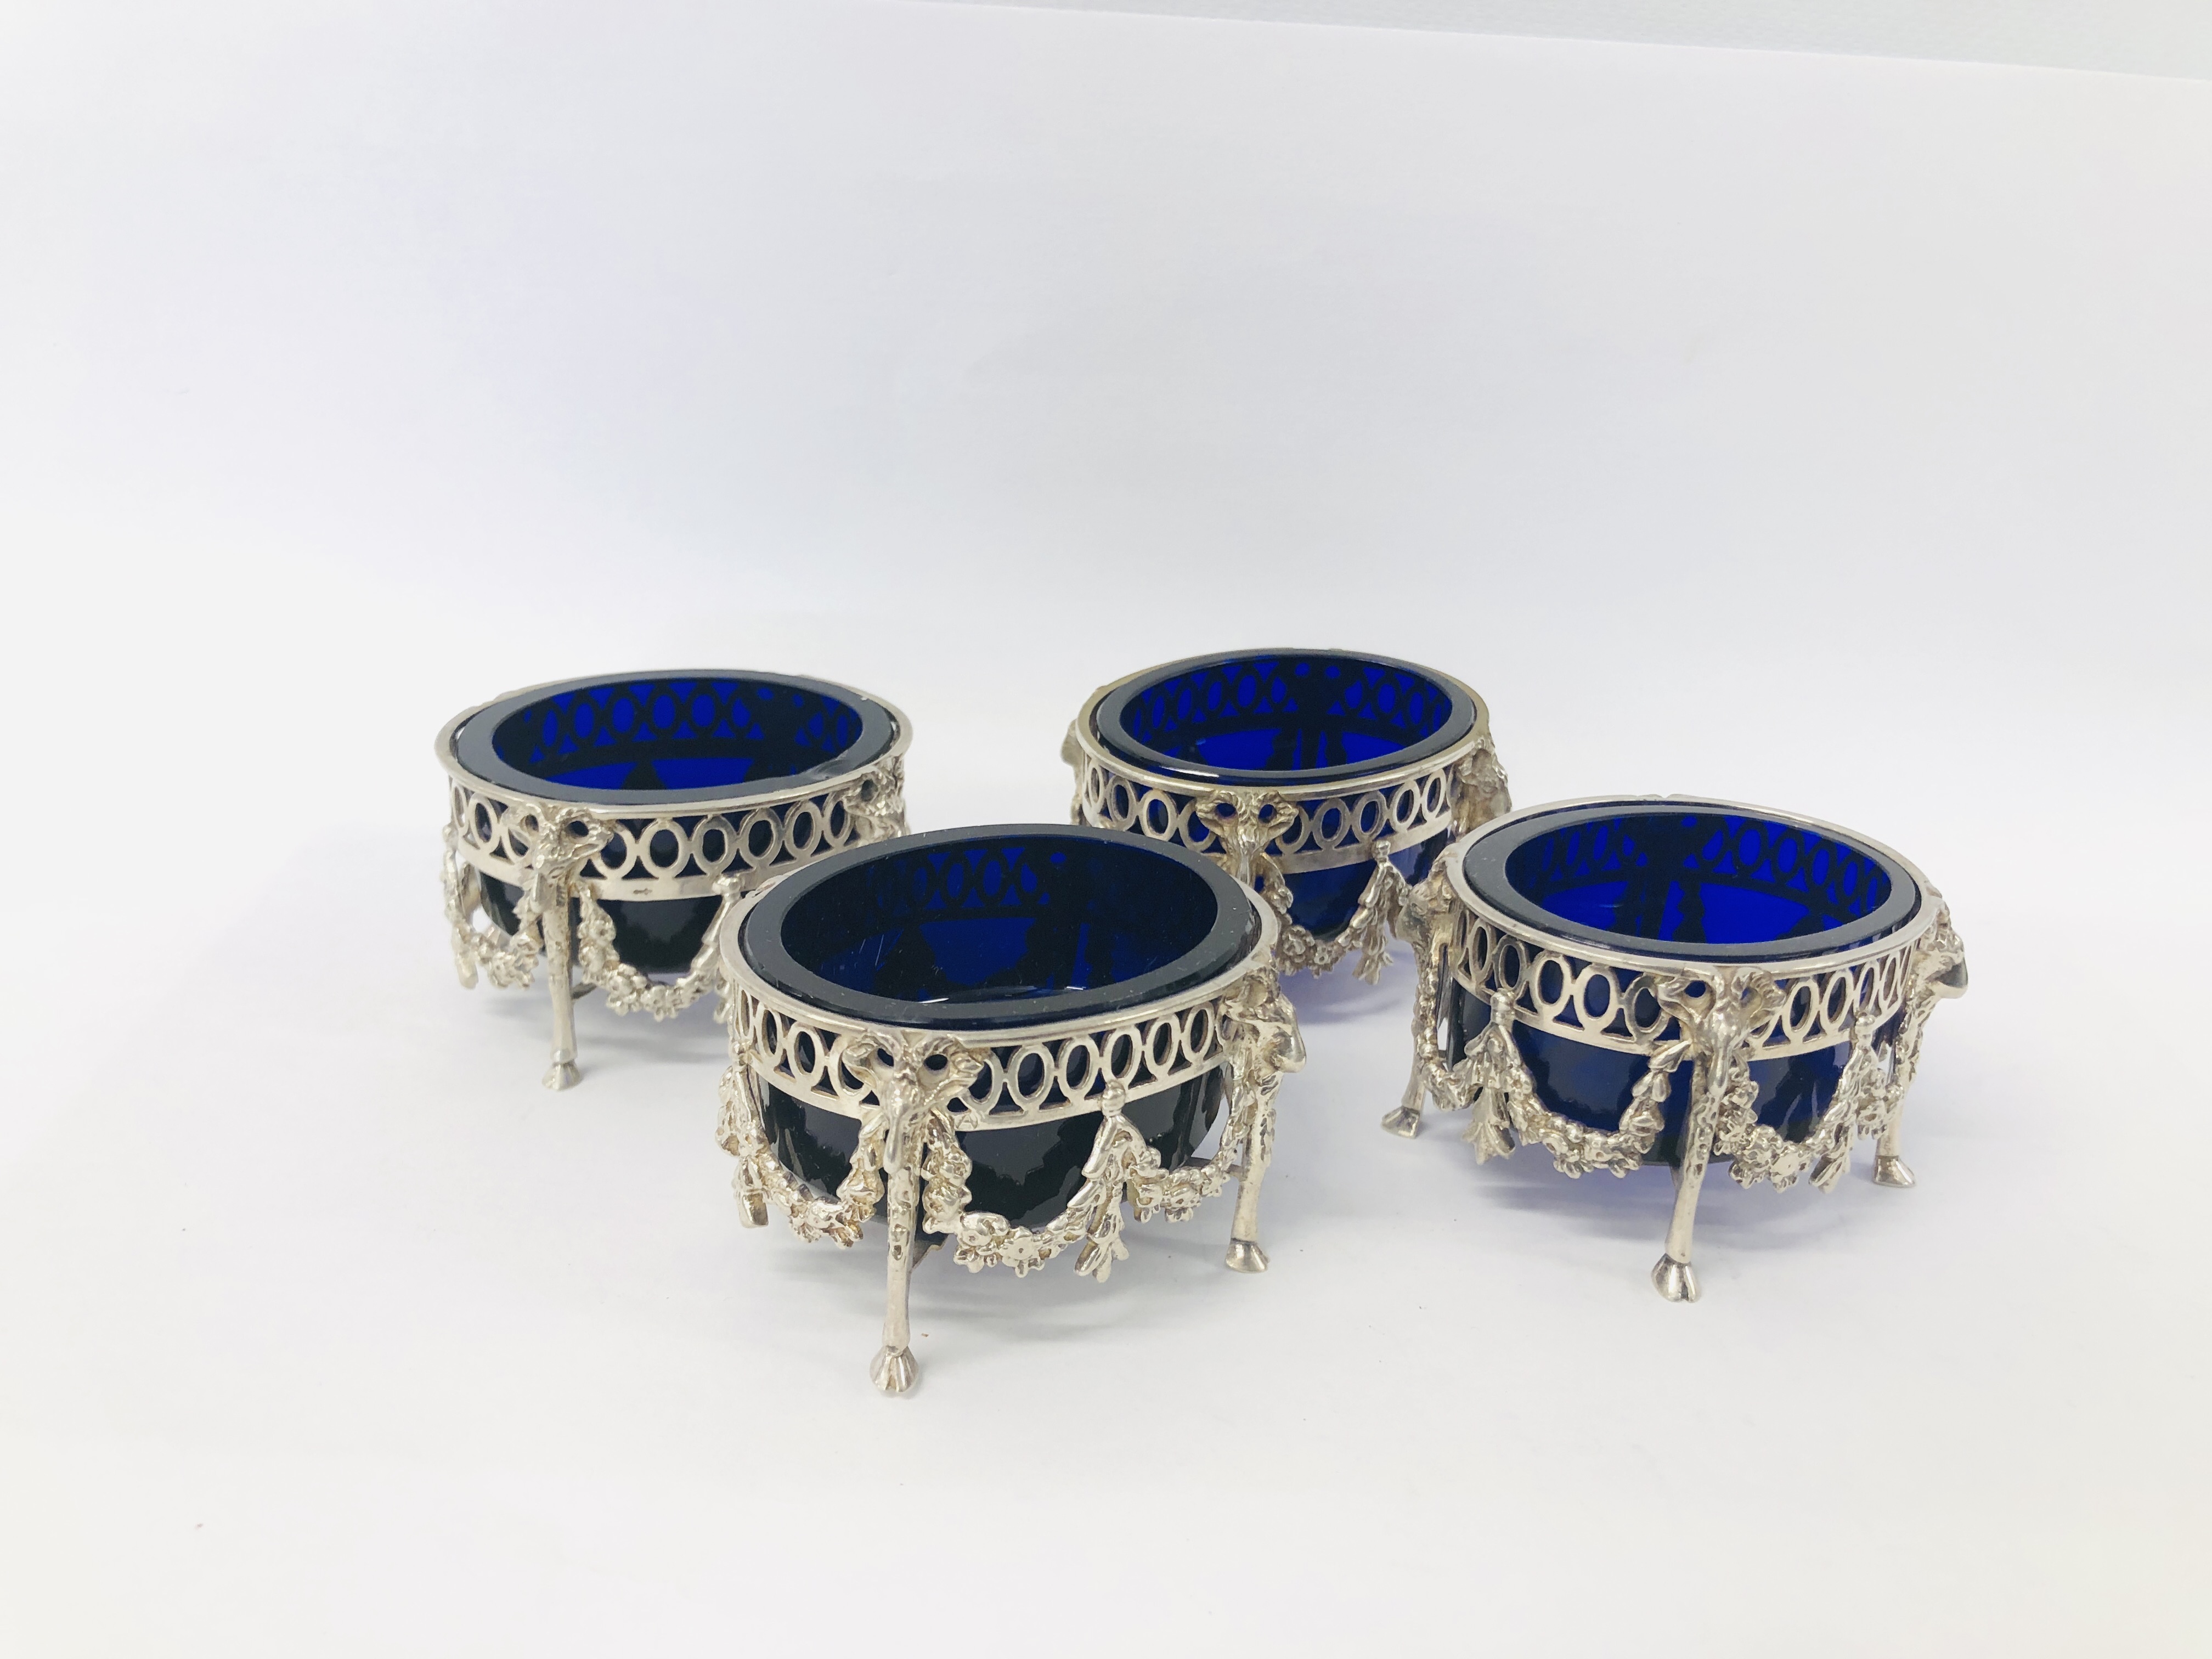 FOUR DUTCH SILVER SALTS WITH BLUE GLASS LINERS (ONE LINER A/F)